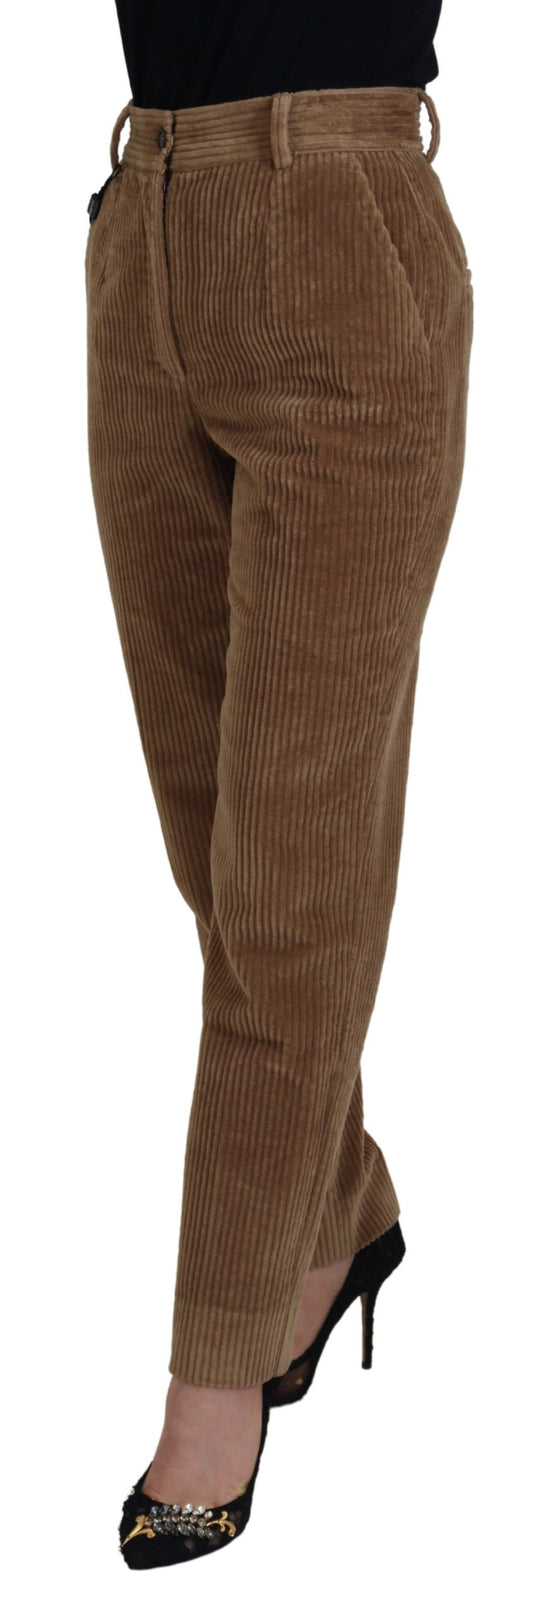 Dolce & Gabbana Elegant Brown Corduroy Pants for Sophisticated Style